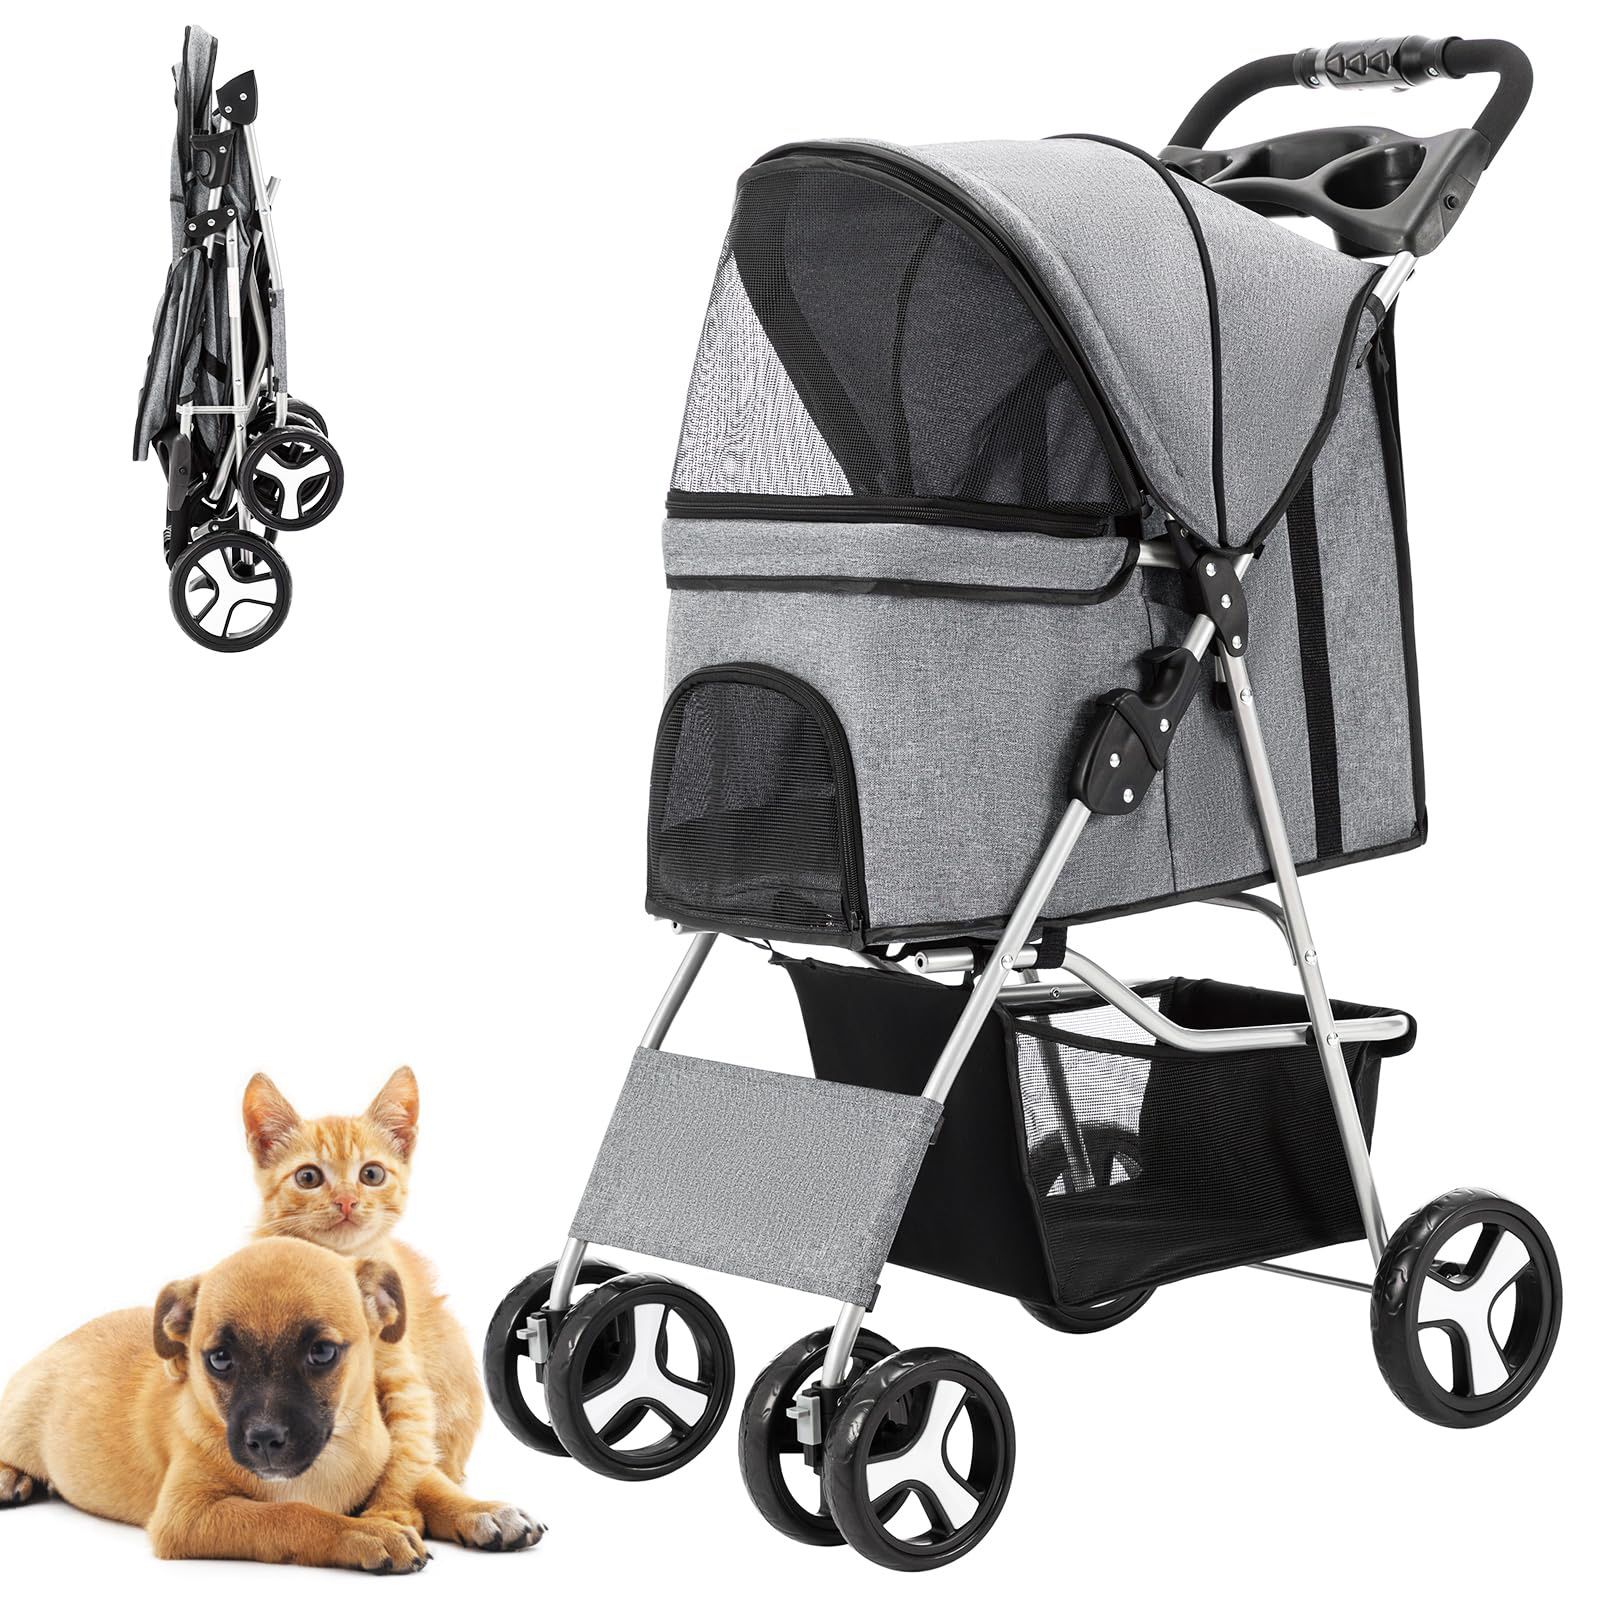 Pet Stroller For Medium Small Dogs & Cats, One-Hand Folding Portable Travel Cat Dog Stroller With Large Storage Basket And Cup Holder, 4 Wheels, Gray